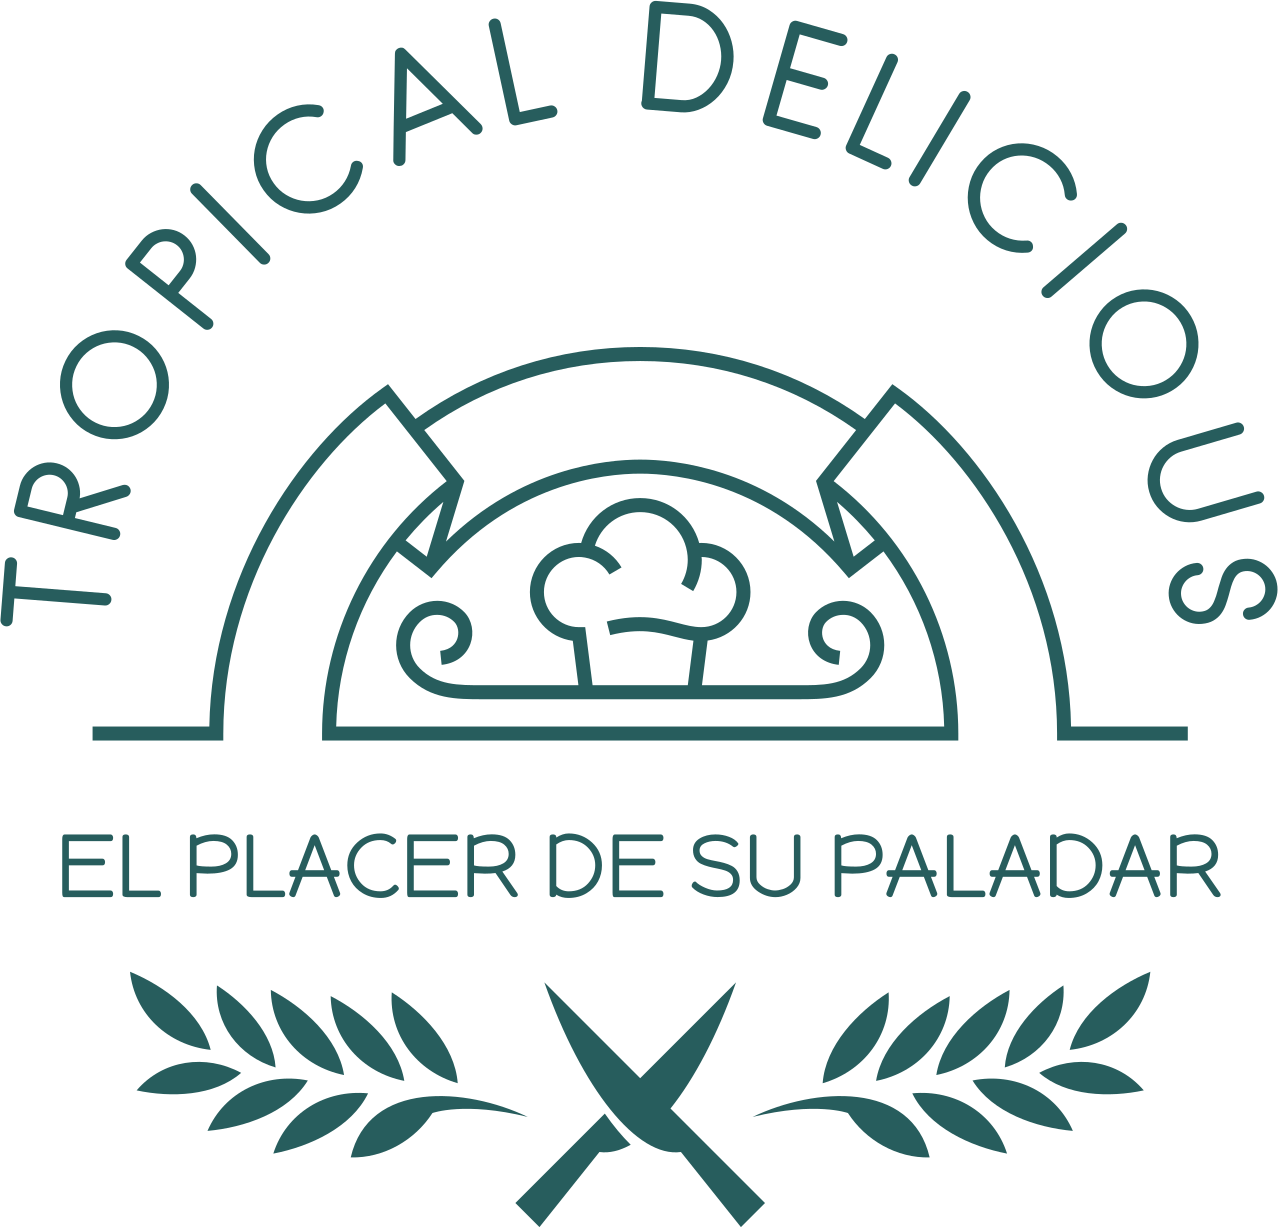 TROPICAL DELICIOUS's web page